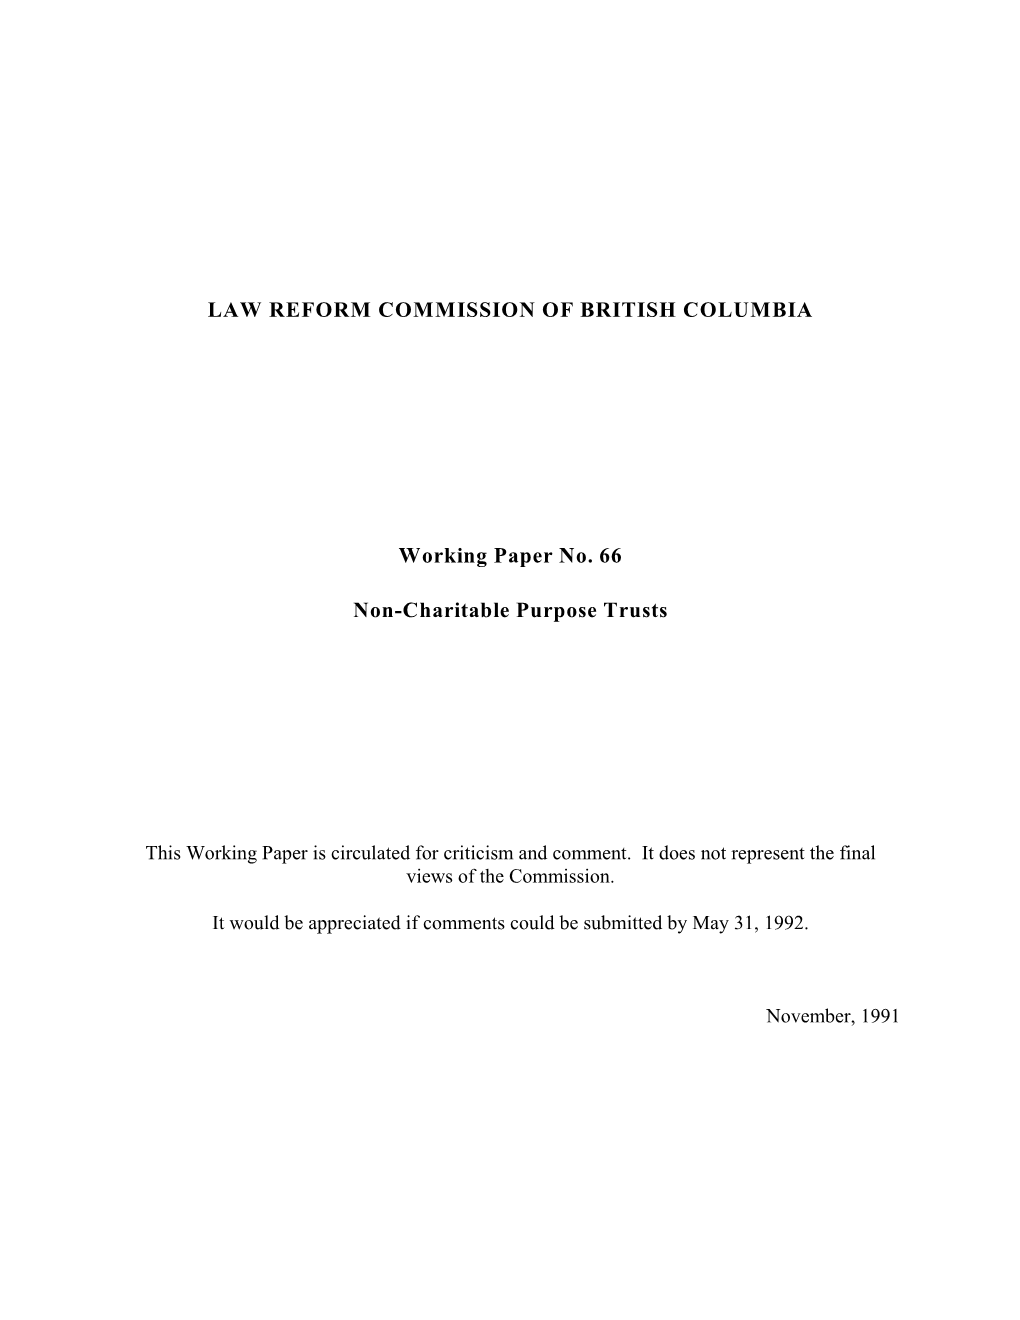 LAW REFORM COMMISSION of BRITISH COLUMBIA Working Paper No. 66 Non-Charitable Purpose Trusts